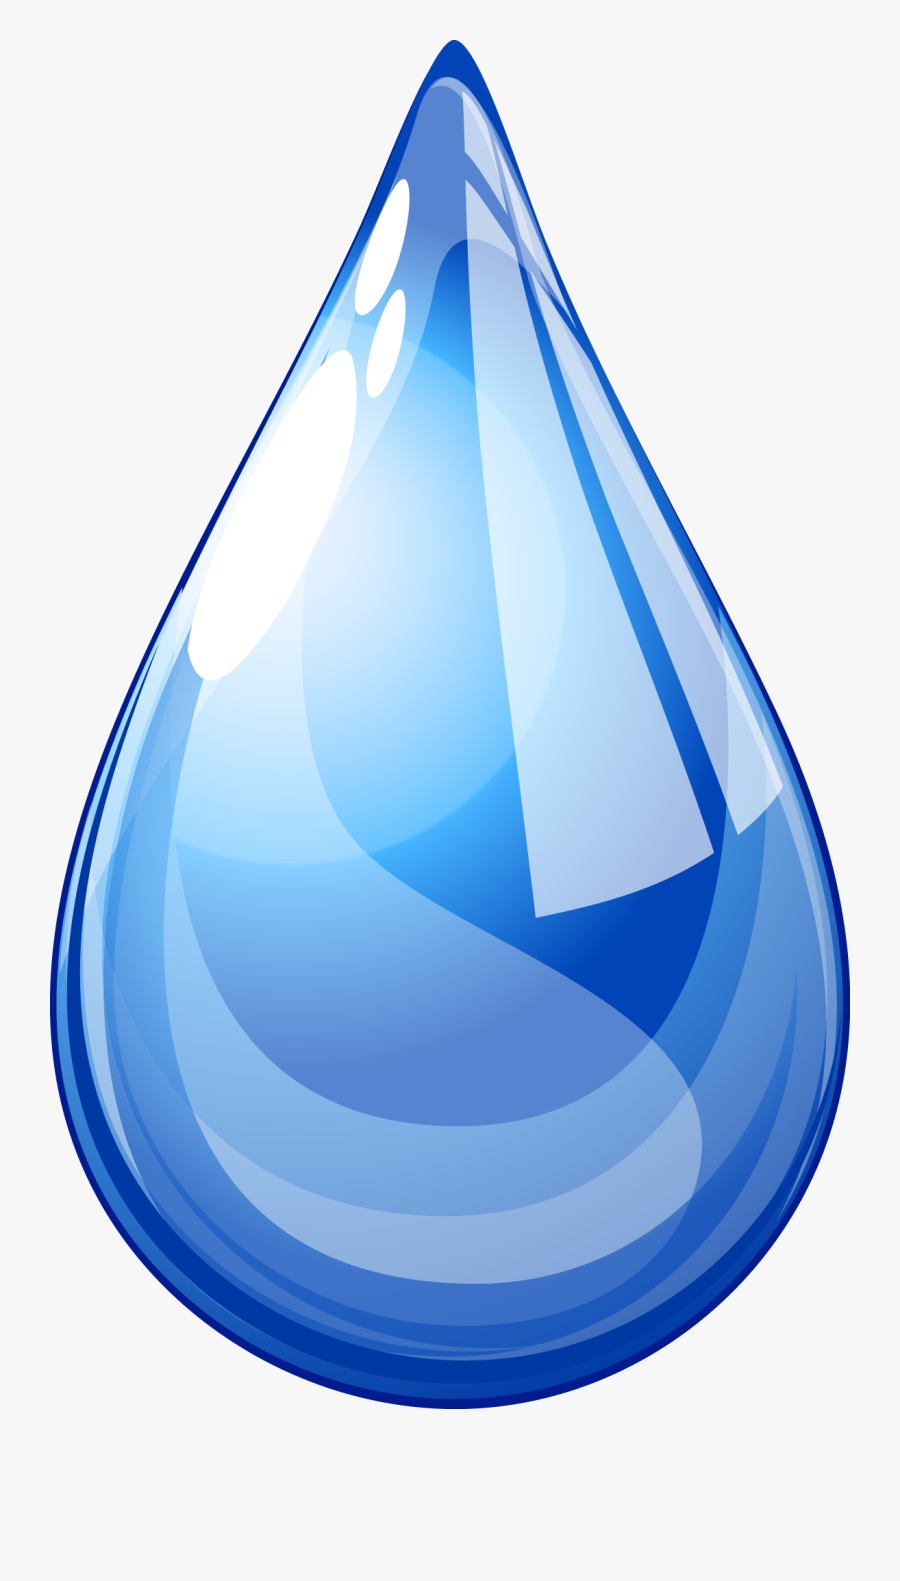 Water Drop Drops Clipart One Of Free Transparent Png - Clipart Water Droplets Png, Transparent Clipart